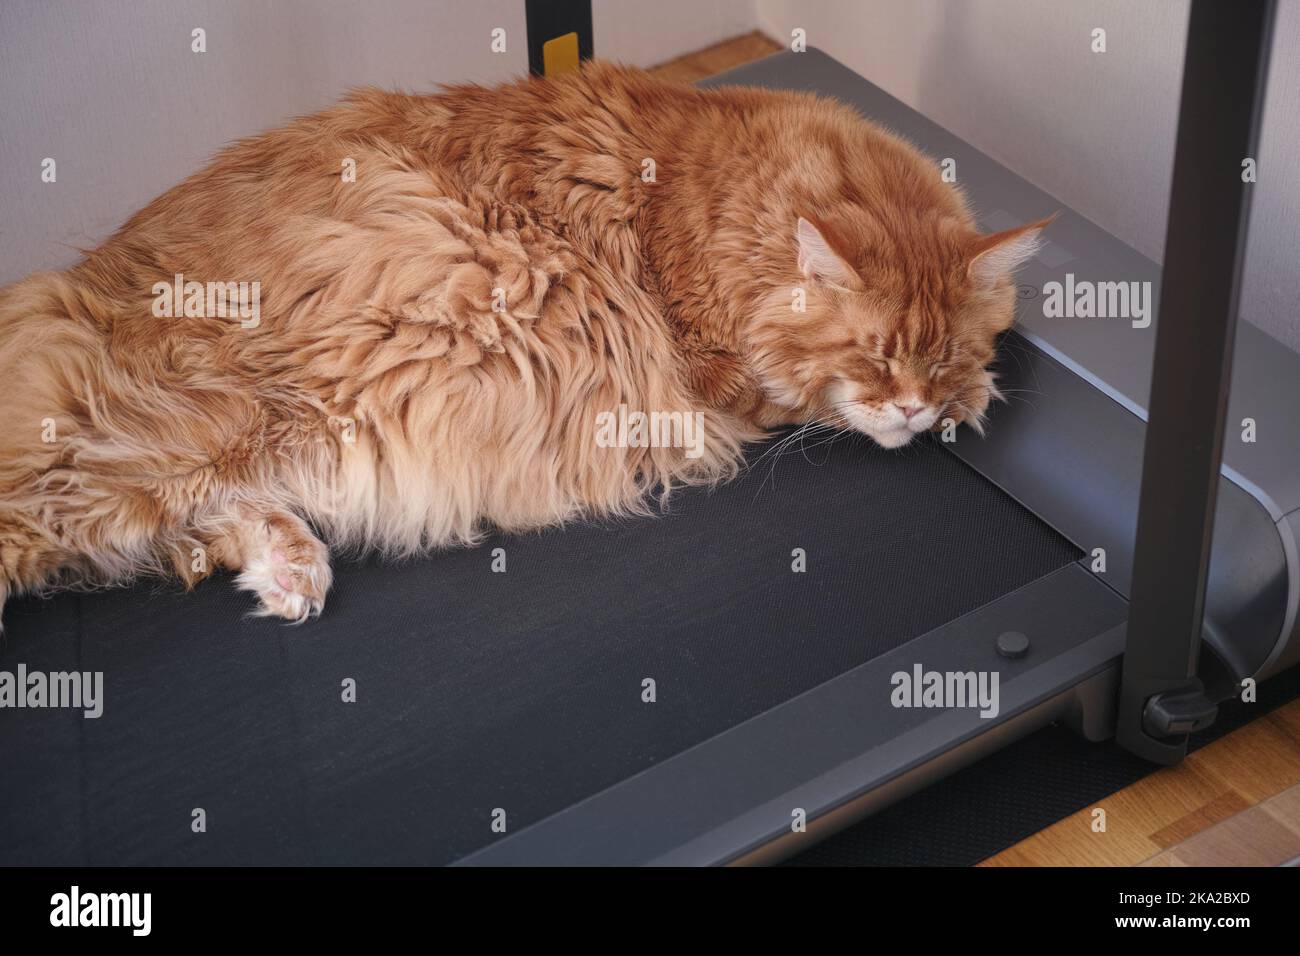 A tired red Maine coon cat sleeping on a treadmill. Close up. Stock Photo